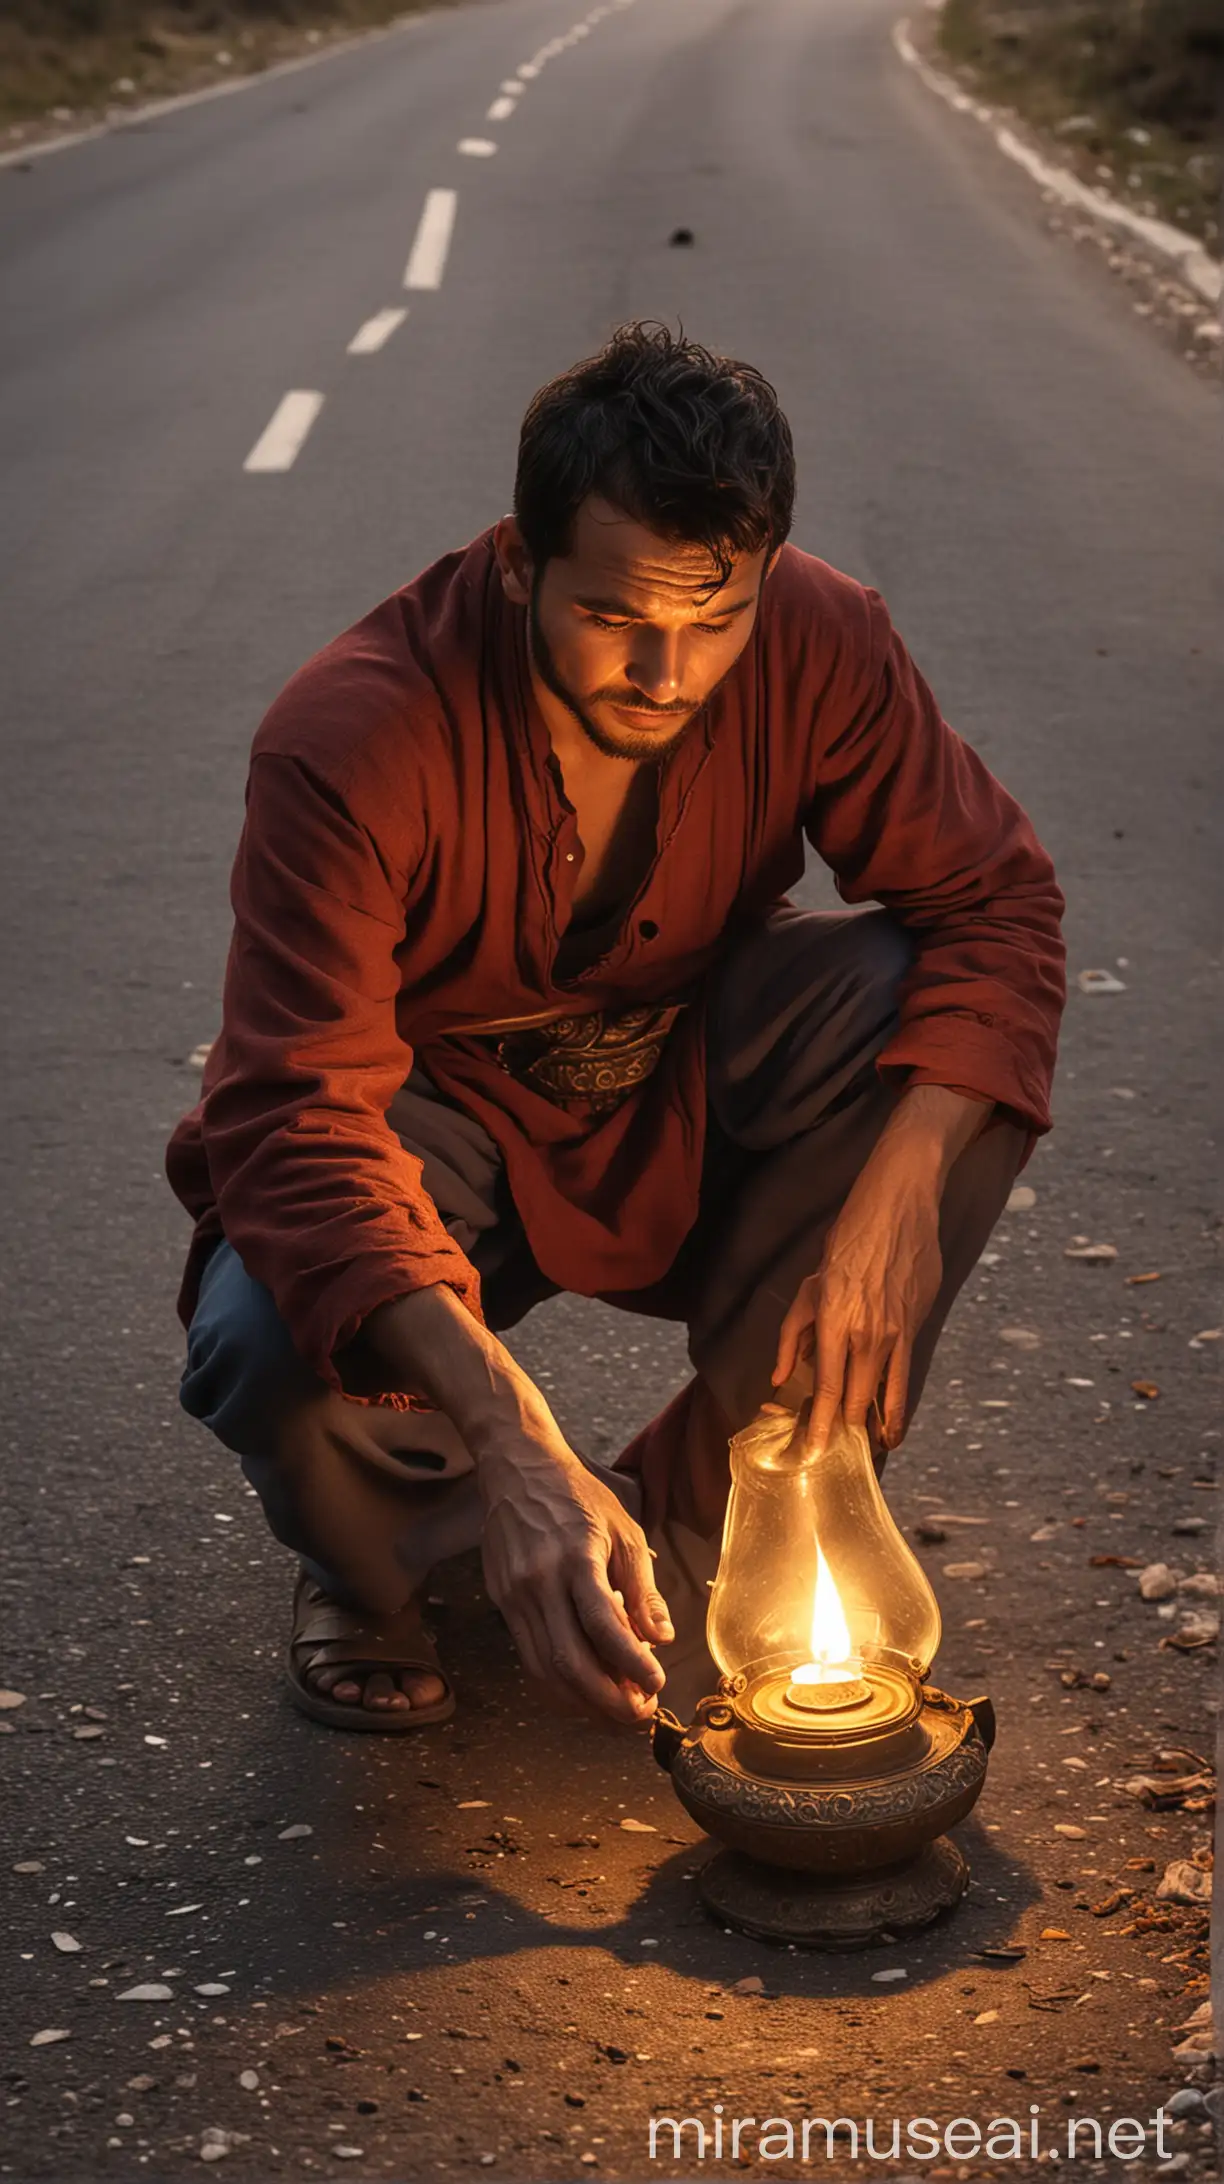 A man found an ancient oil lamp on the road and started rubbing it. A genie came out of the lamp and said: "For your kindness, I will grant you three wishes."